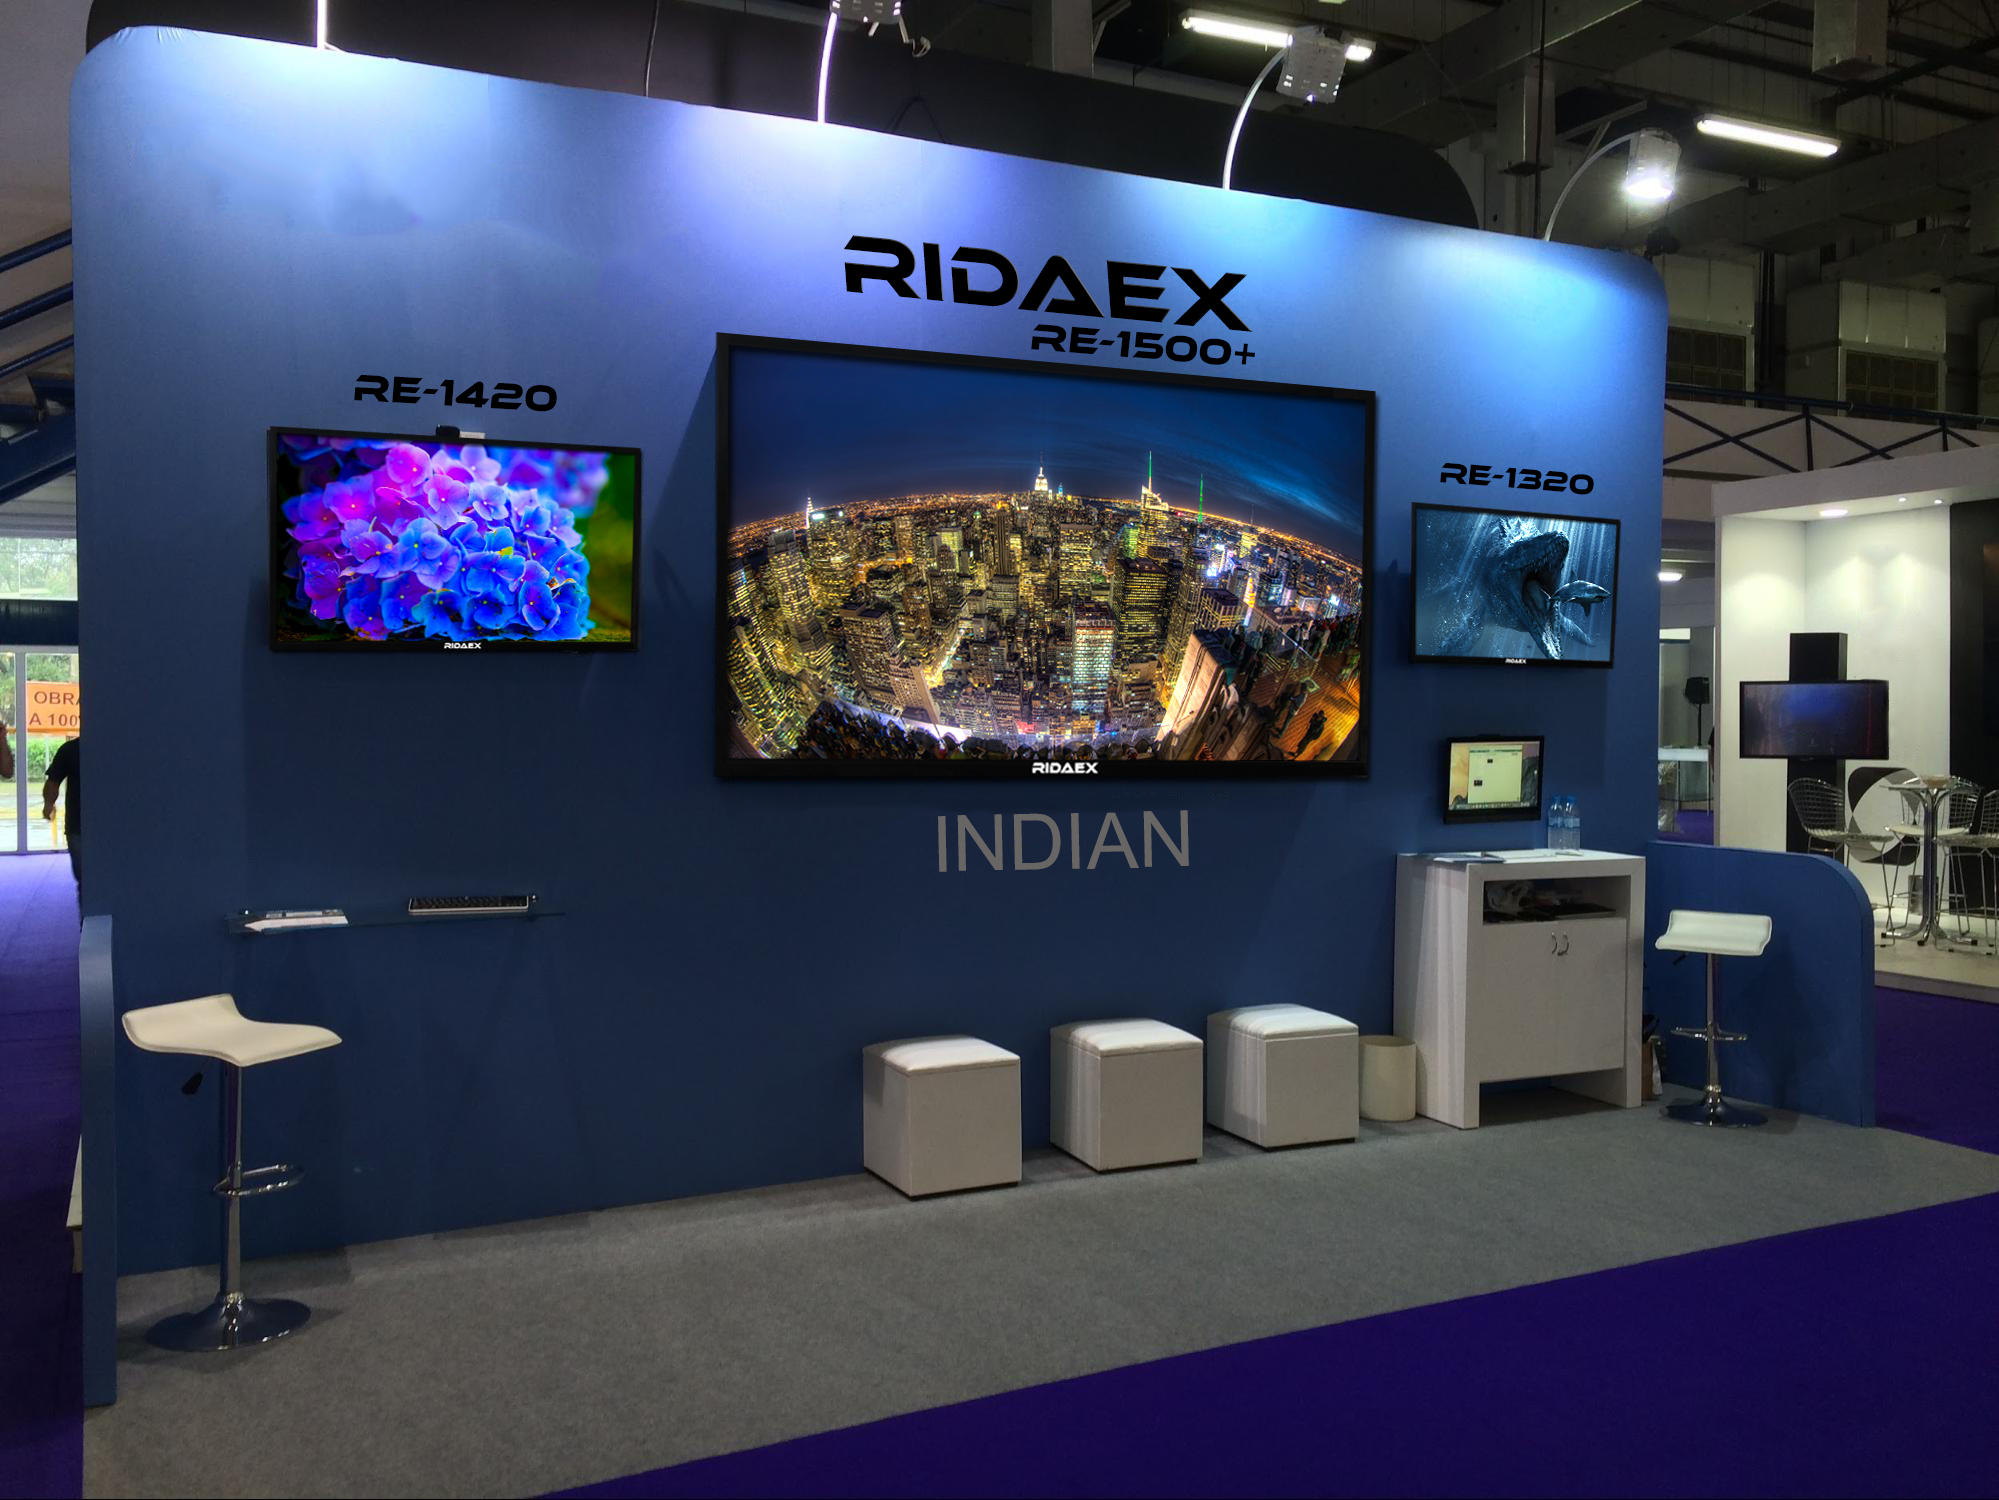 RIDAEX, The Indian player conquering the new gen smart TV market introduces RE PRO 2019 models 3